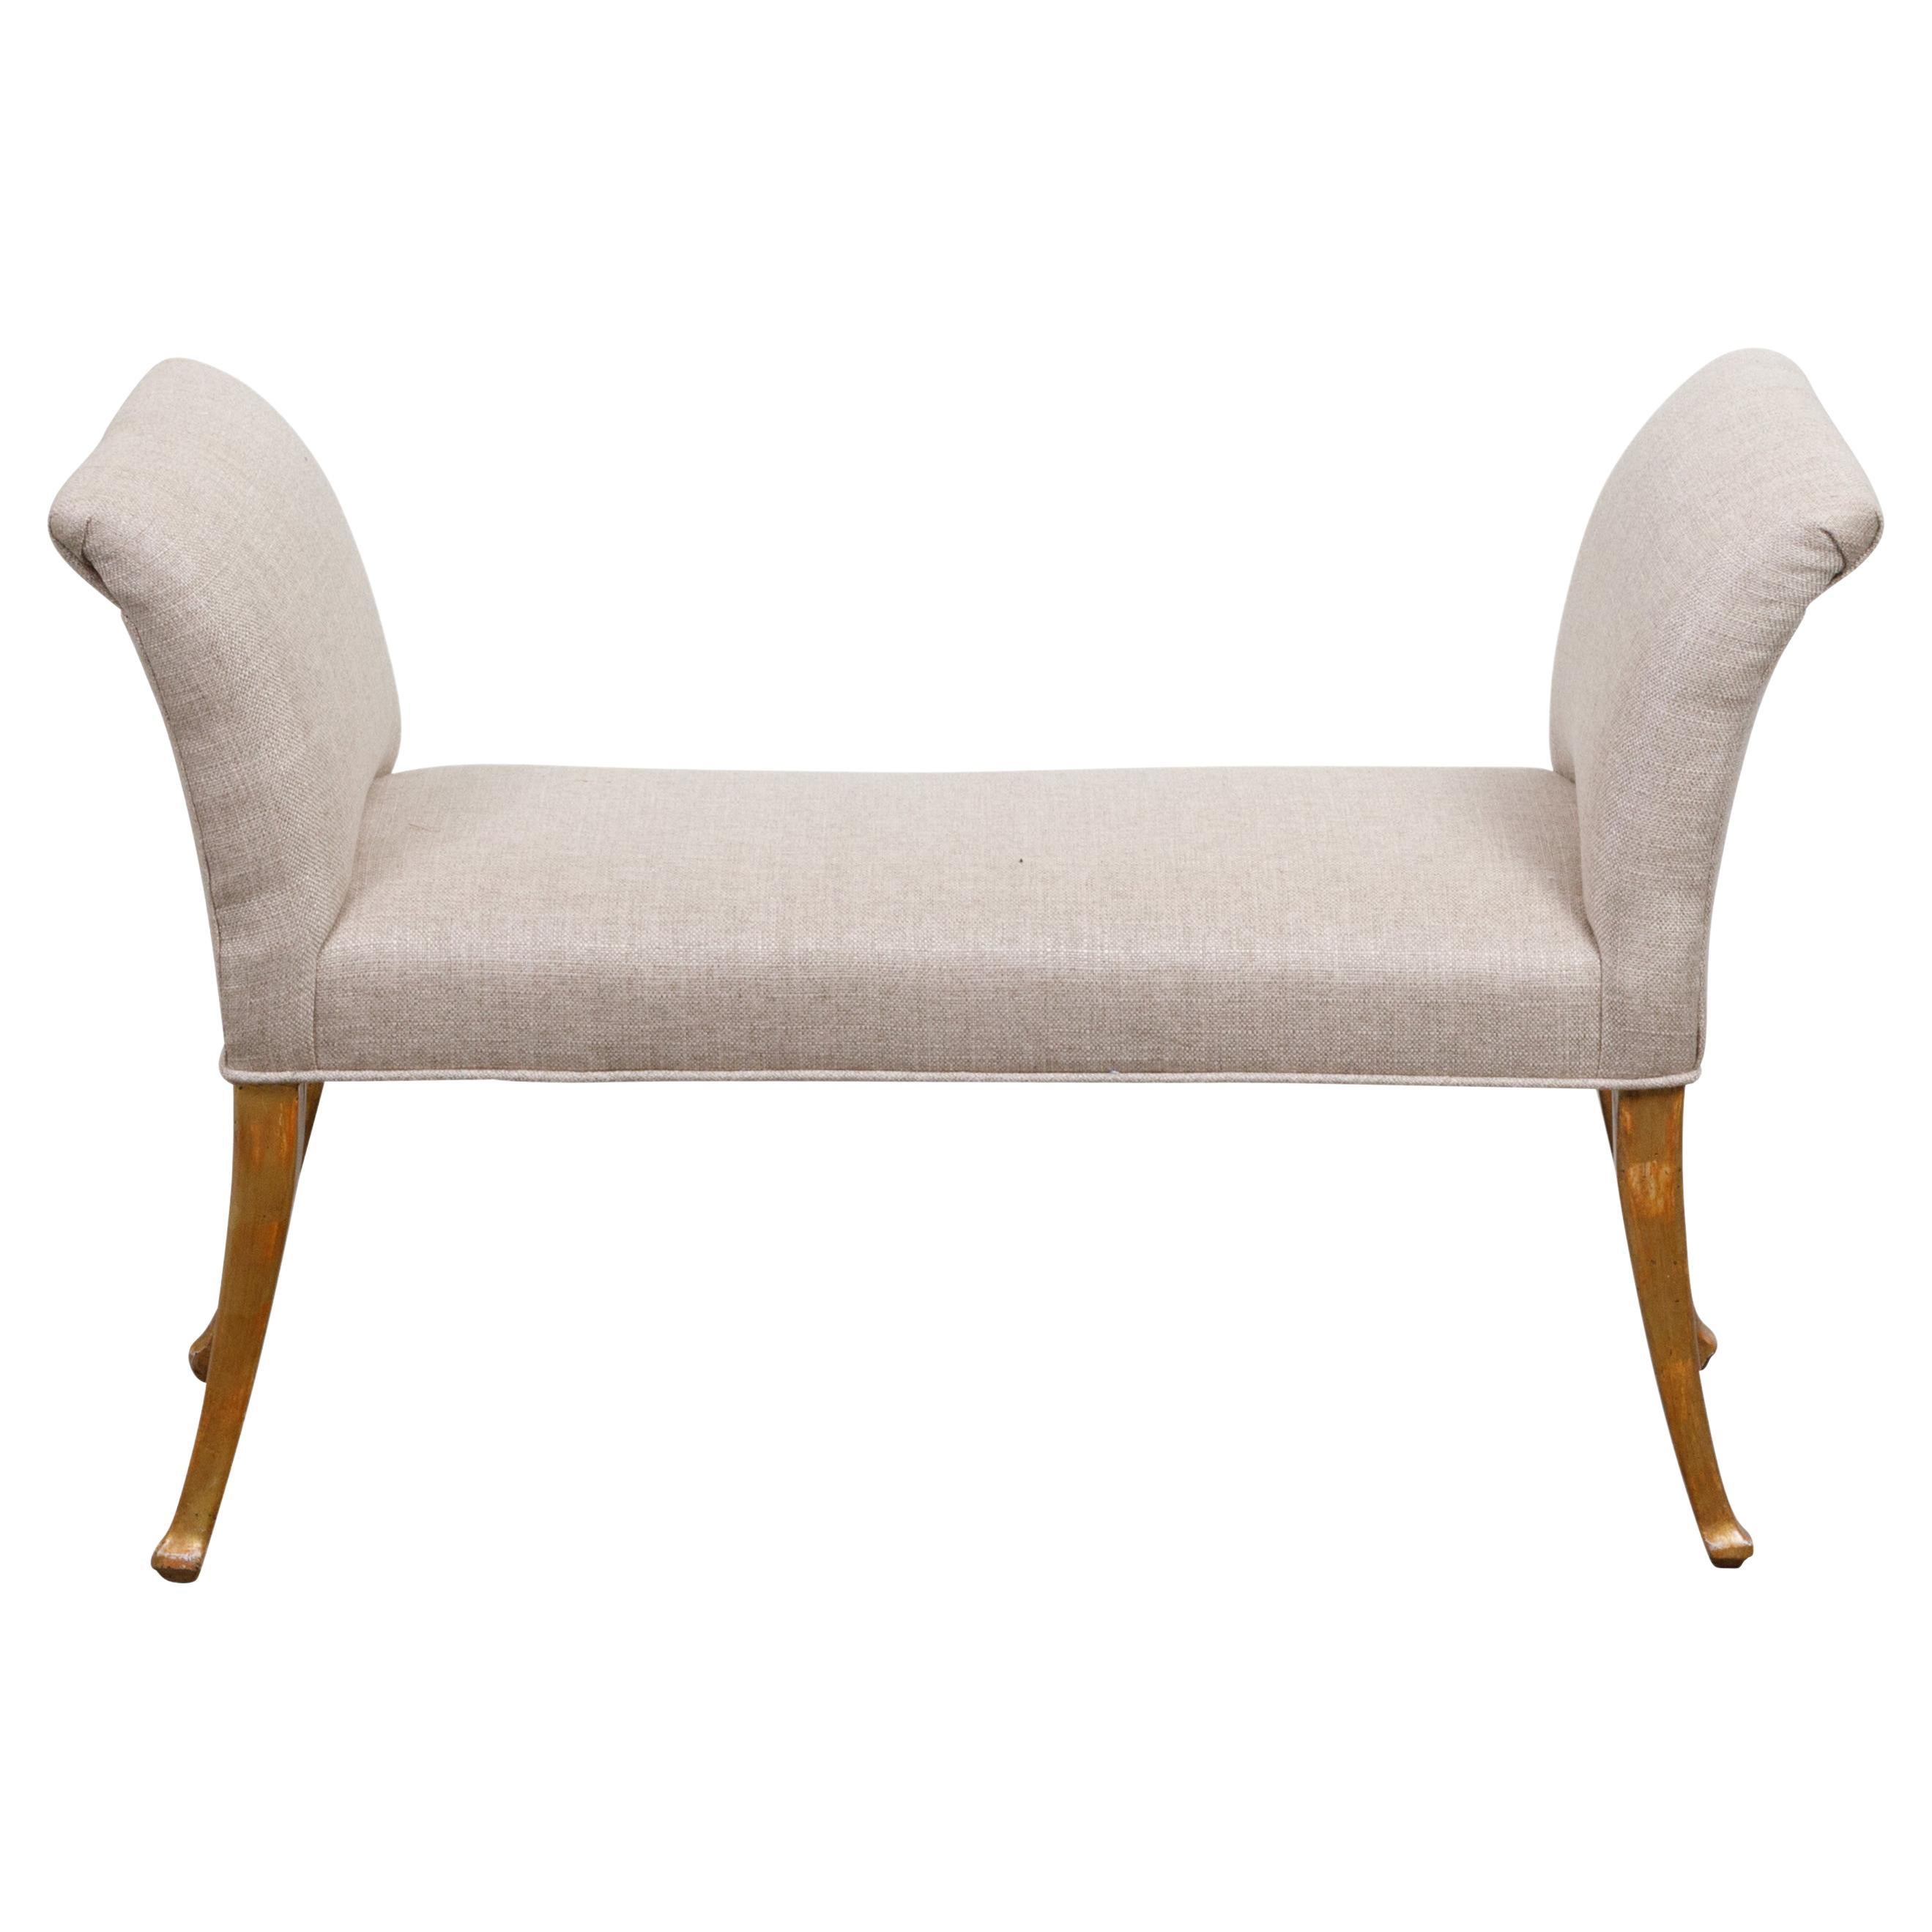 French Mid-Century Giltwood Bench with Saber Legs and New Upholstery